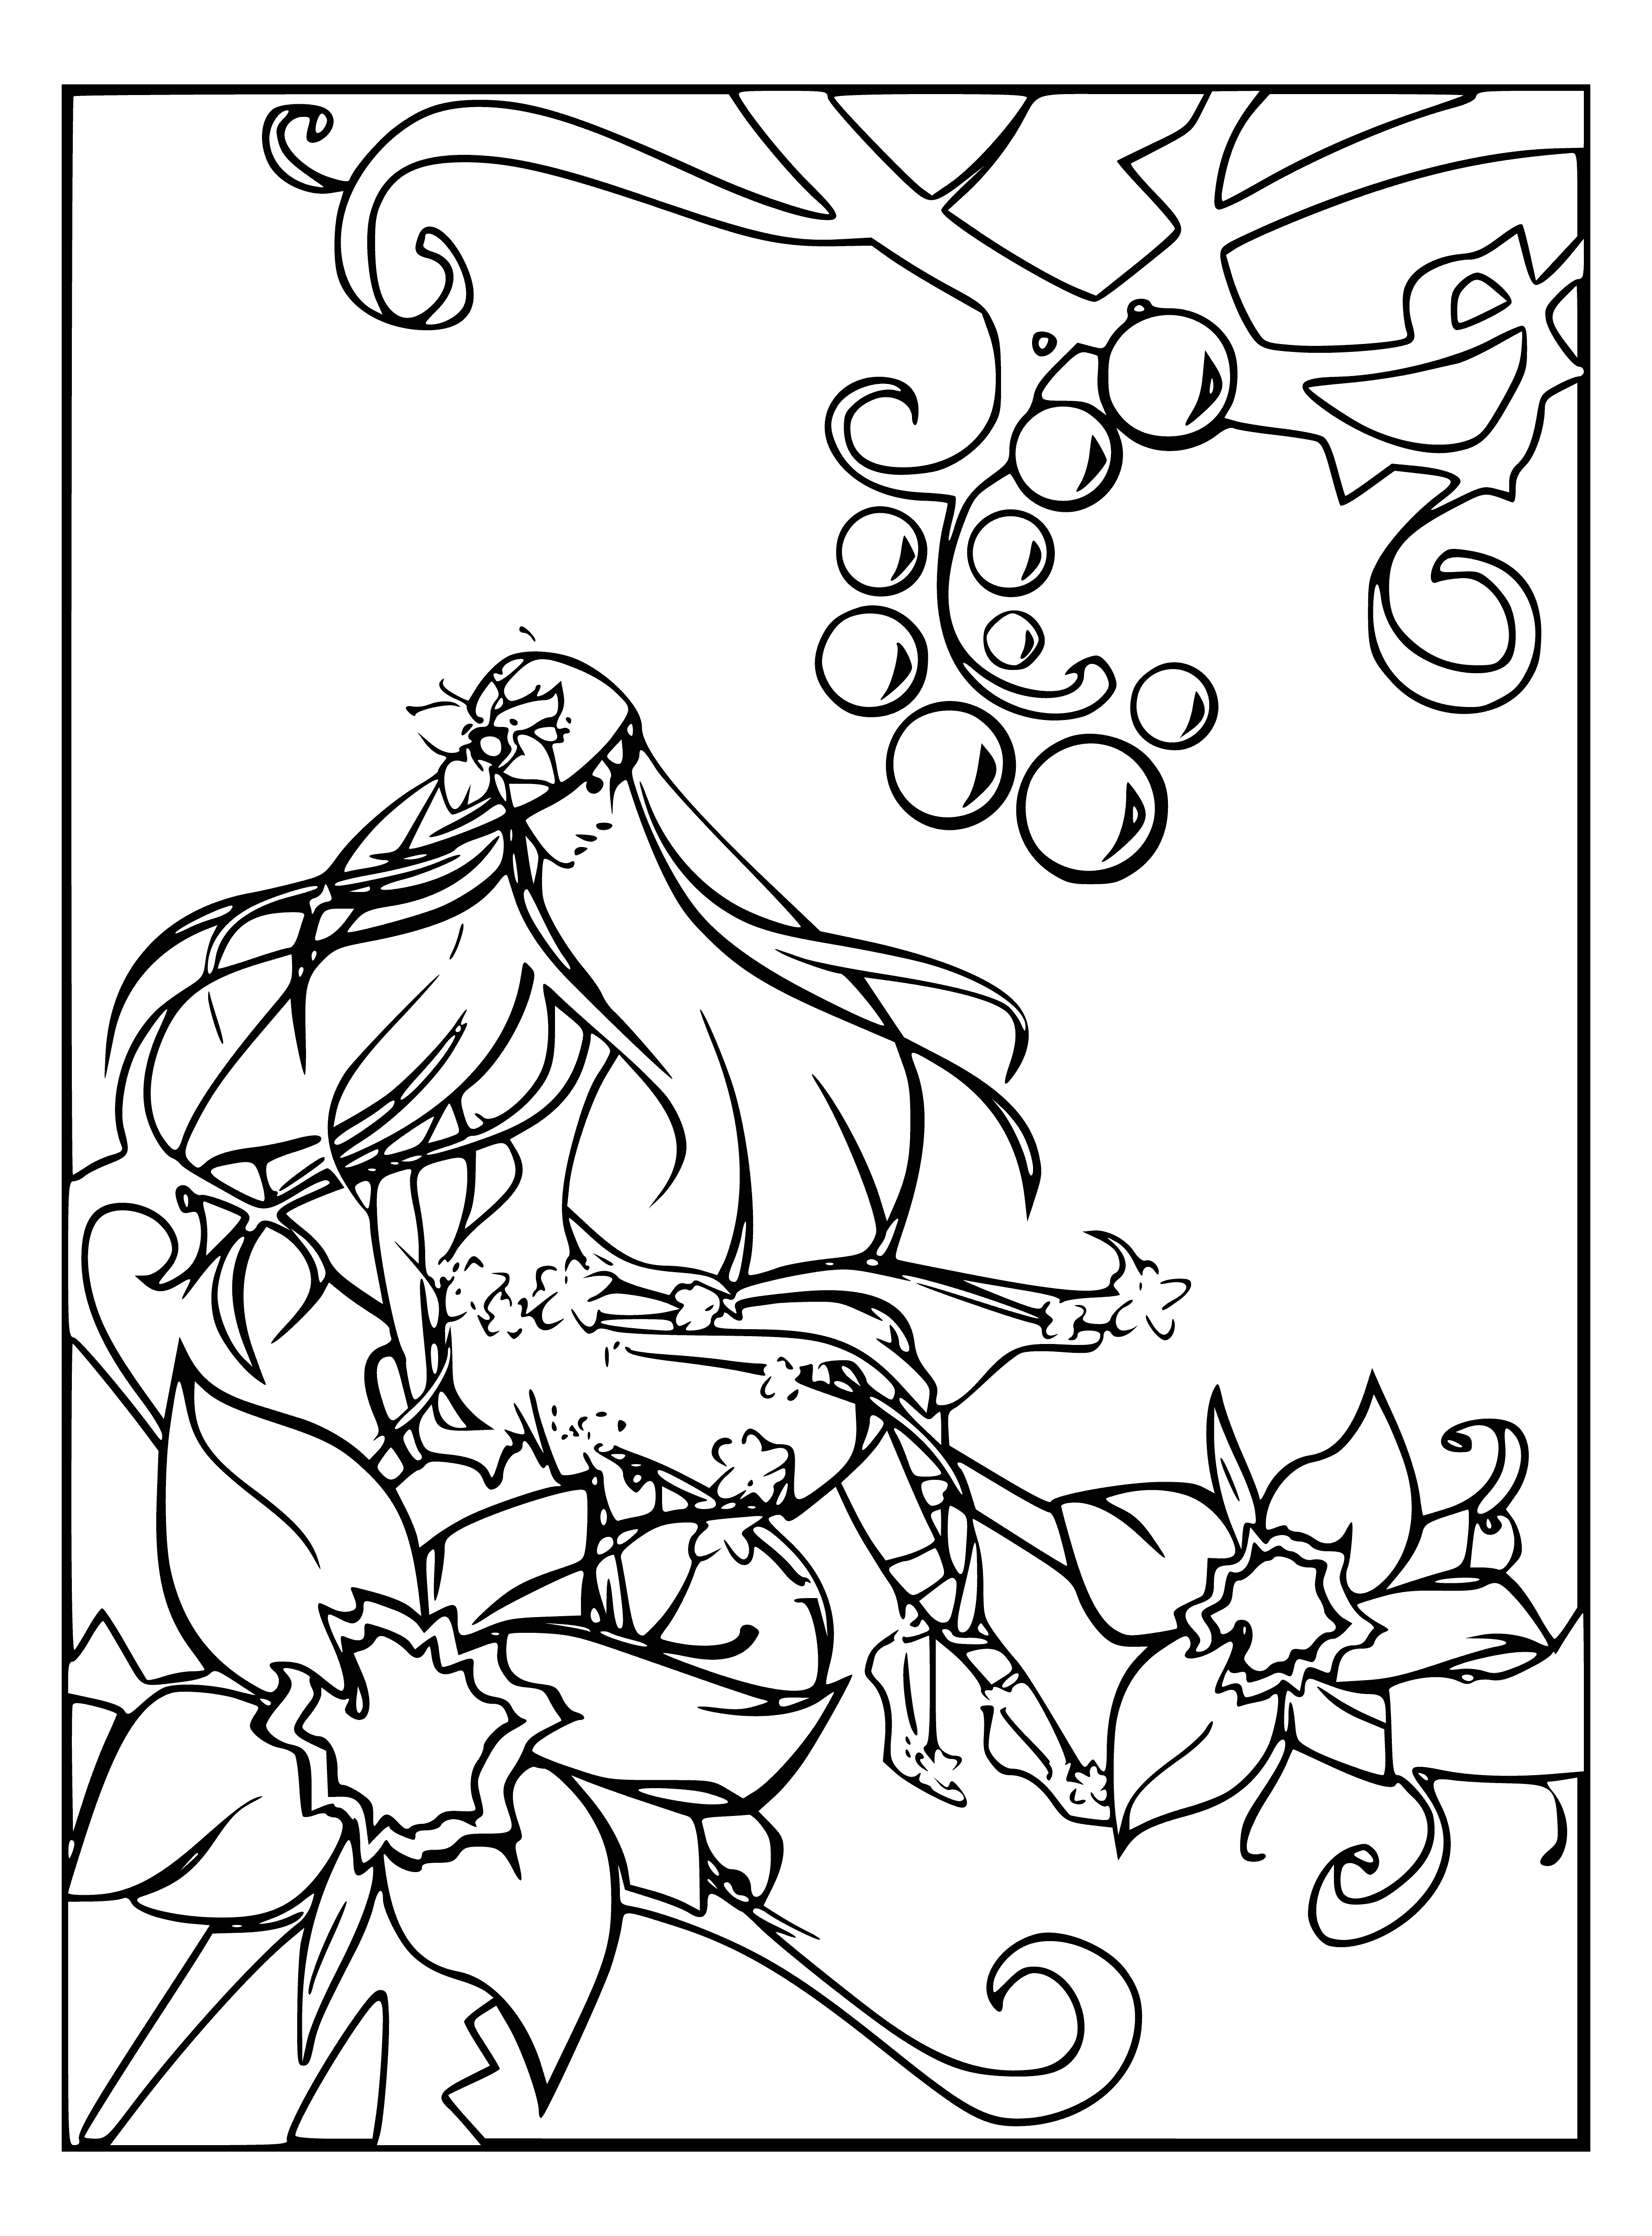 Thumbelina on a flower coloring page